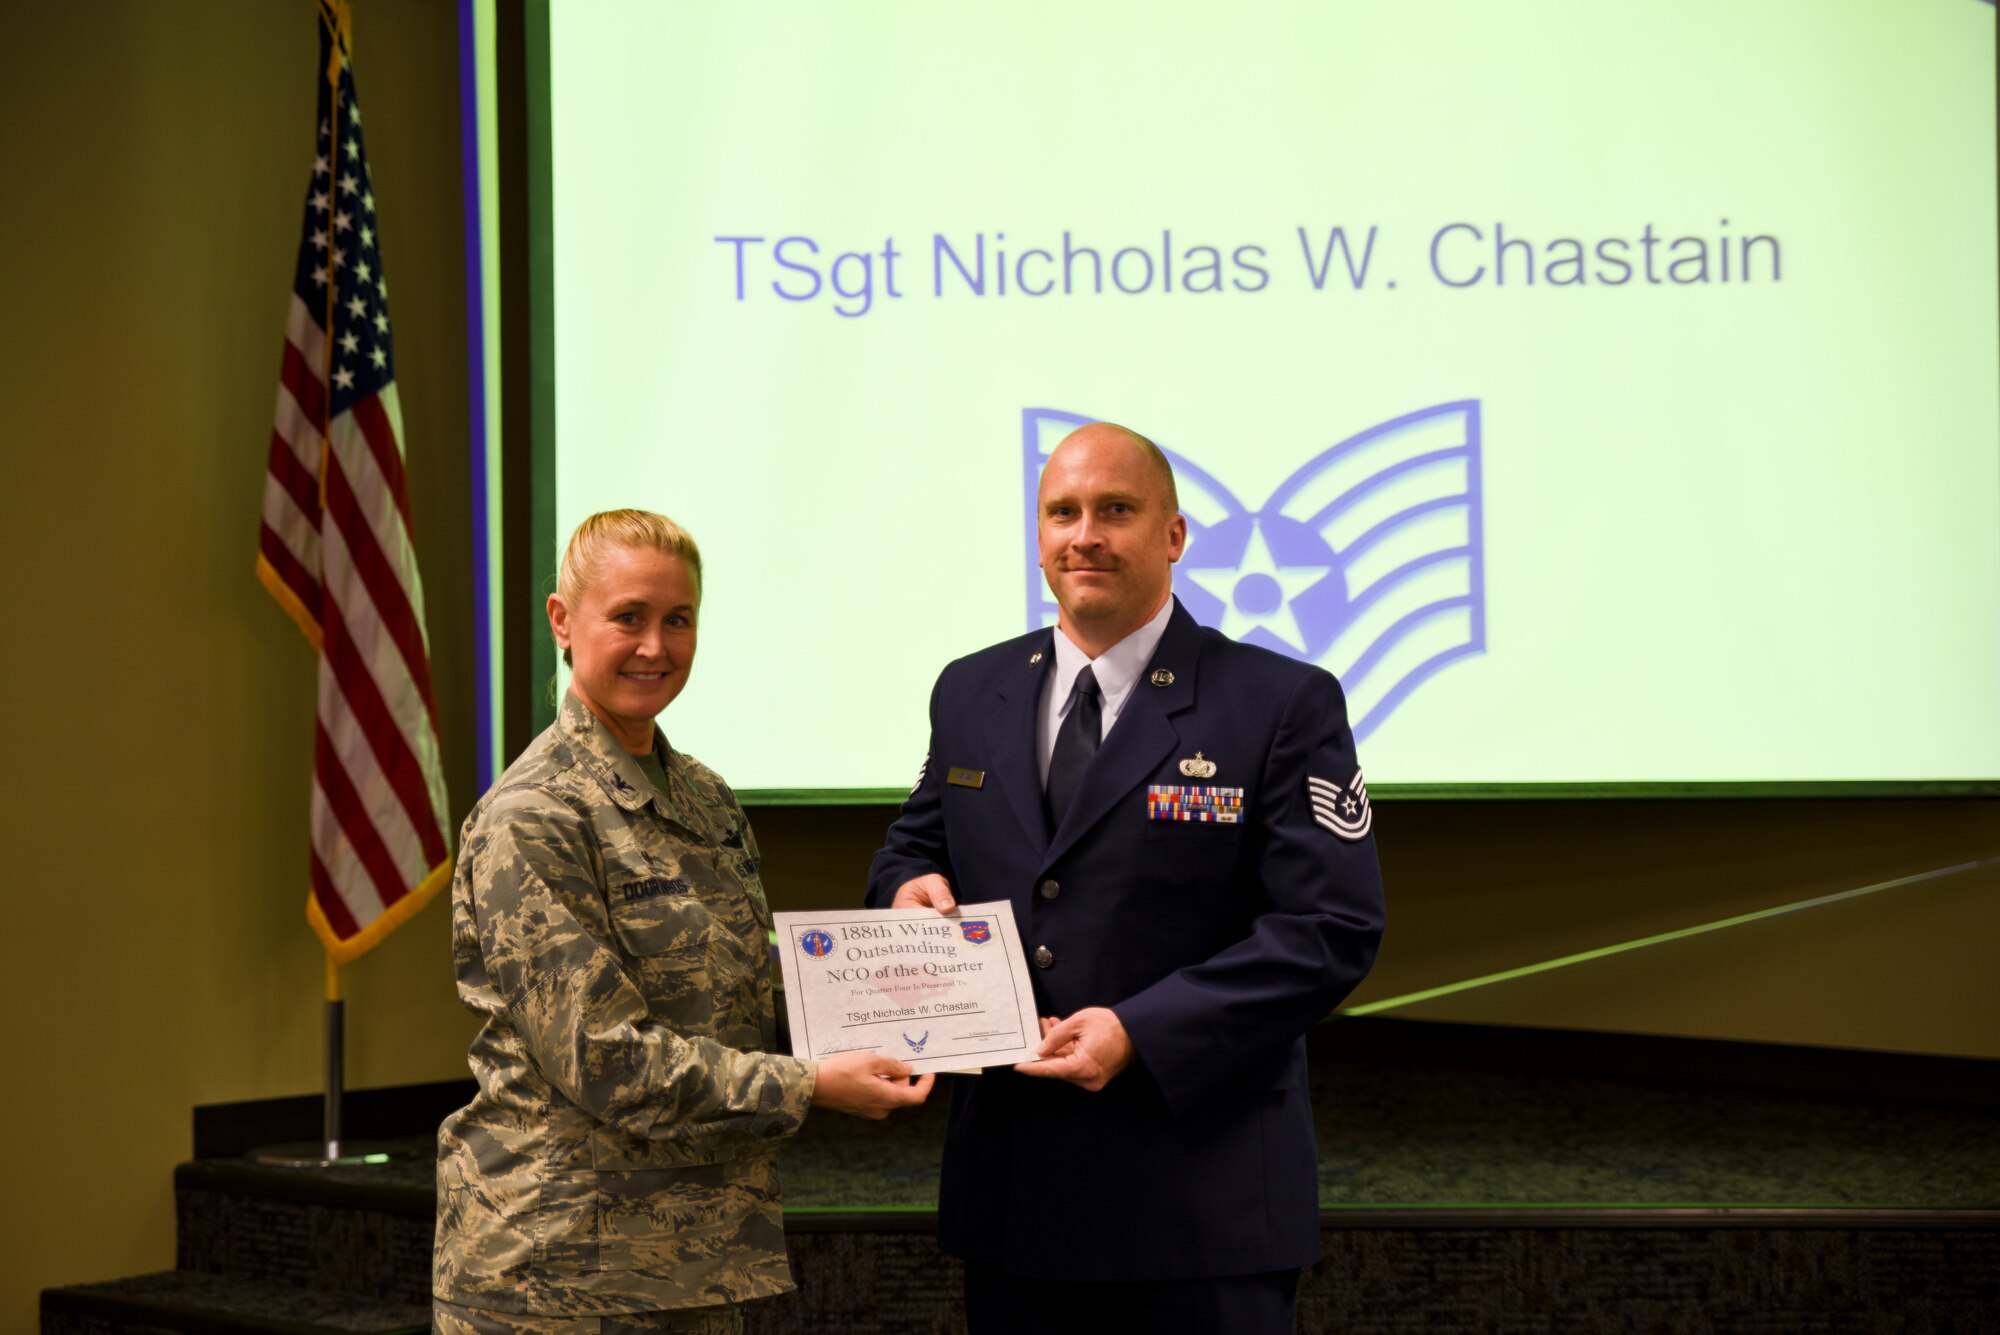 Tech. Sgt. Nicholas Chastain is presented the certificate for his selection as the Noncommissioned Officer of the Quarter by Col. Bobbi Doorenbos, 188th Wing Commander, during a commander's call held Dec. 5, 2015. Nineteen Airmen of the Quarter nominees were recognized for their exceptional service to the wing during the last quarter that distinguished themselves among their peers in the 188th. Winners were selected in the Airman, Noncommissioned Officer, Senior NCO, Company Grade Officer and Field Grade Officer categories. (U.S. Air National Guard photo by Capt. Holli Nelson/released)   